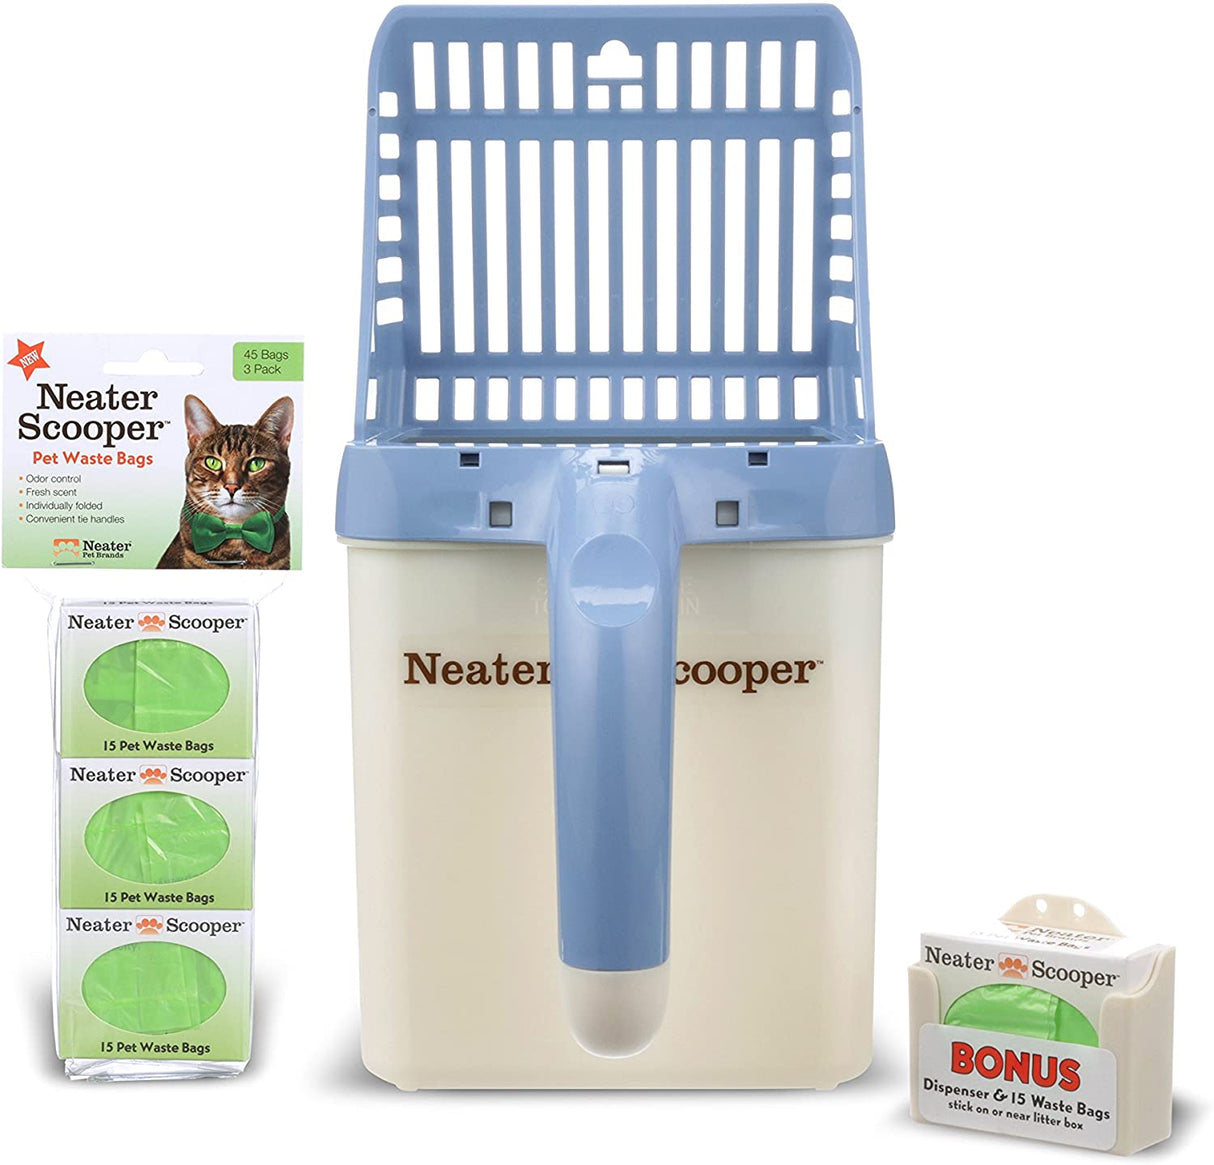 Blue Neater Scooper with 60 bags